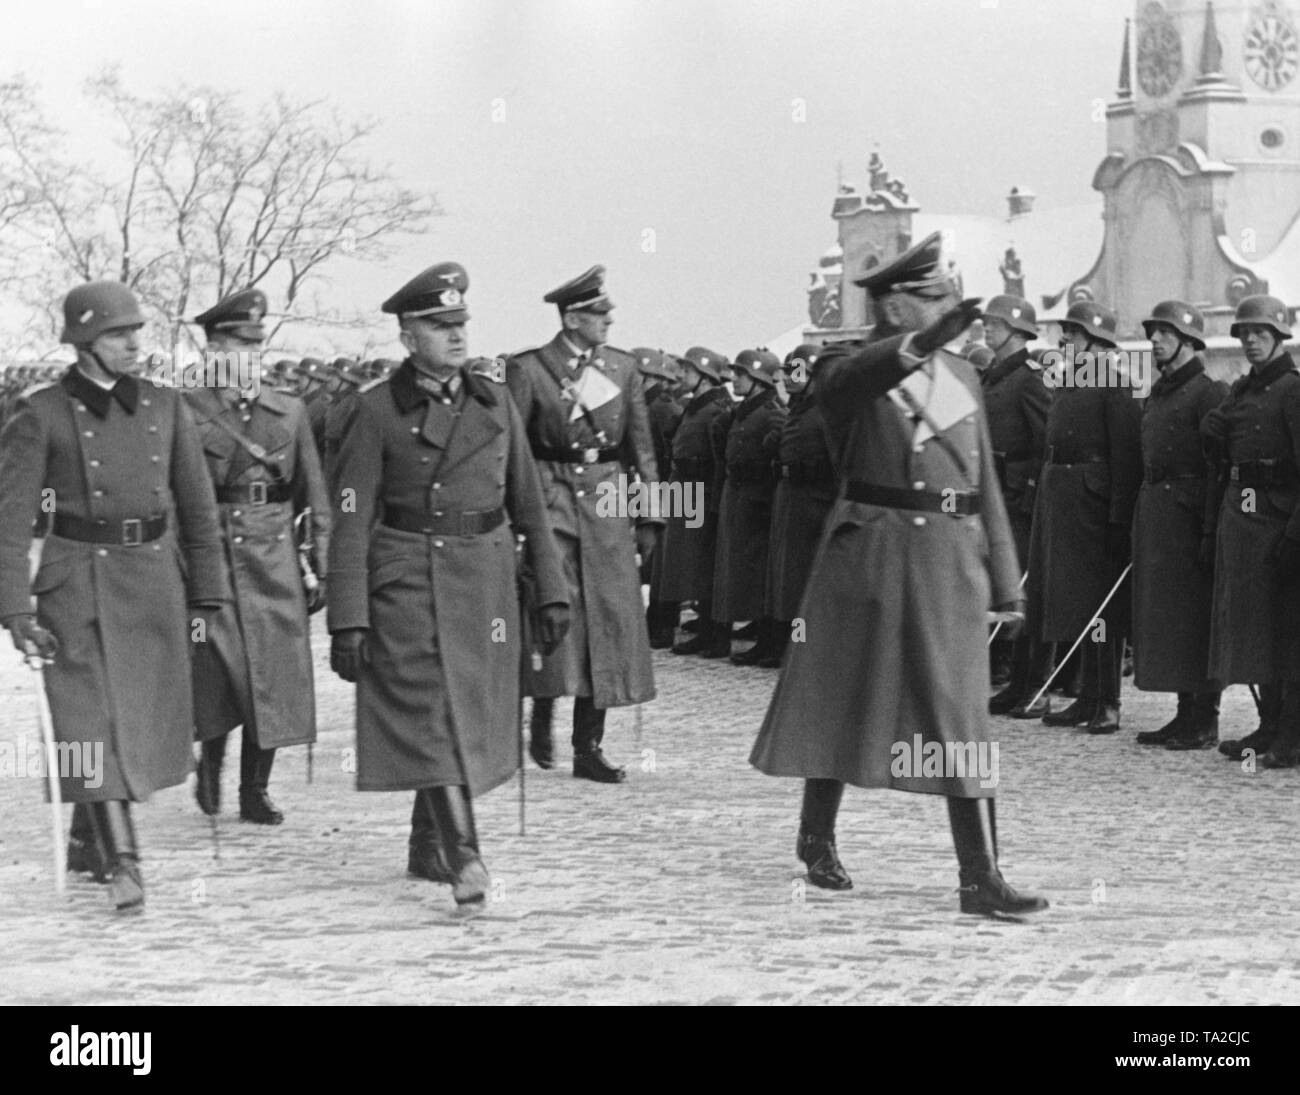 The Reich Protector for Bohemia and Moravia, Konstantin von Neurath, inspects a guard of honor. Behind him, the Secretary of State of the Reich Protectorate of Bohemia and Moravia, Karl Hermann Frank (left) and General Erich Friderici. Since March 1939, the areas of Bohemia and Moravia had been under German occupation. Stock Photo